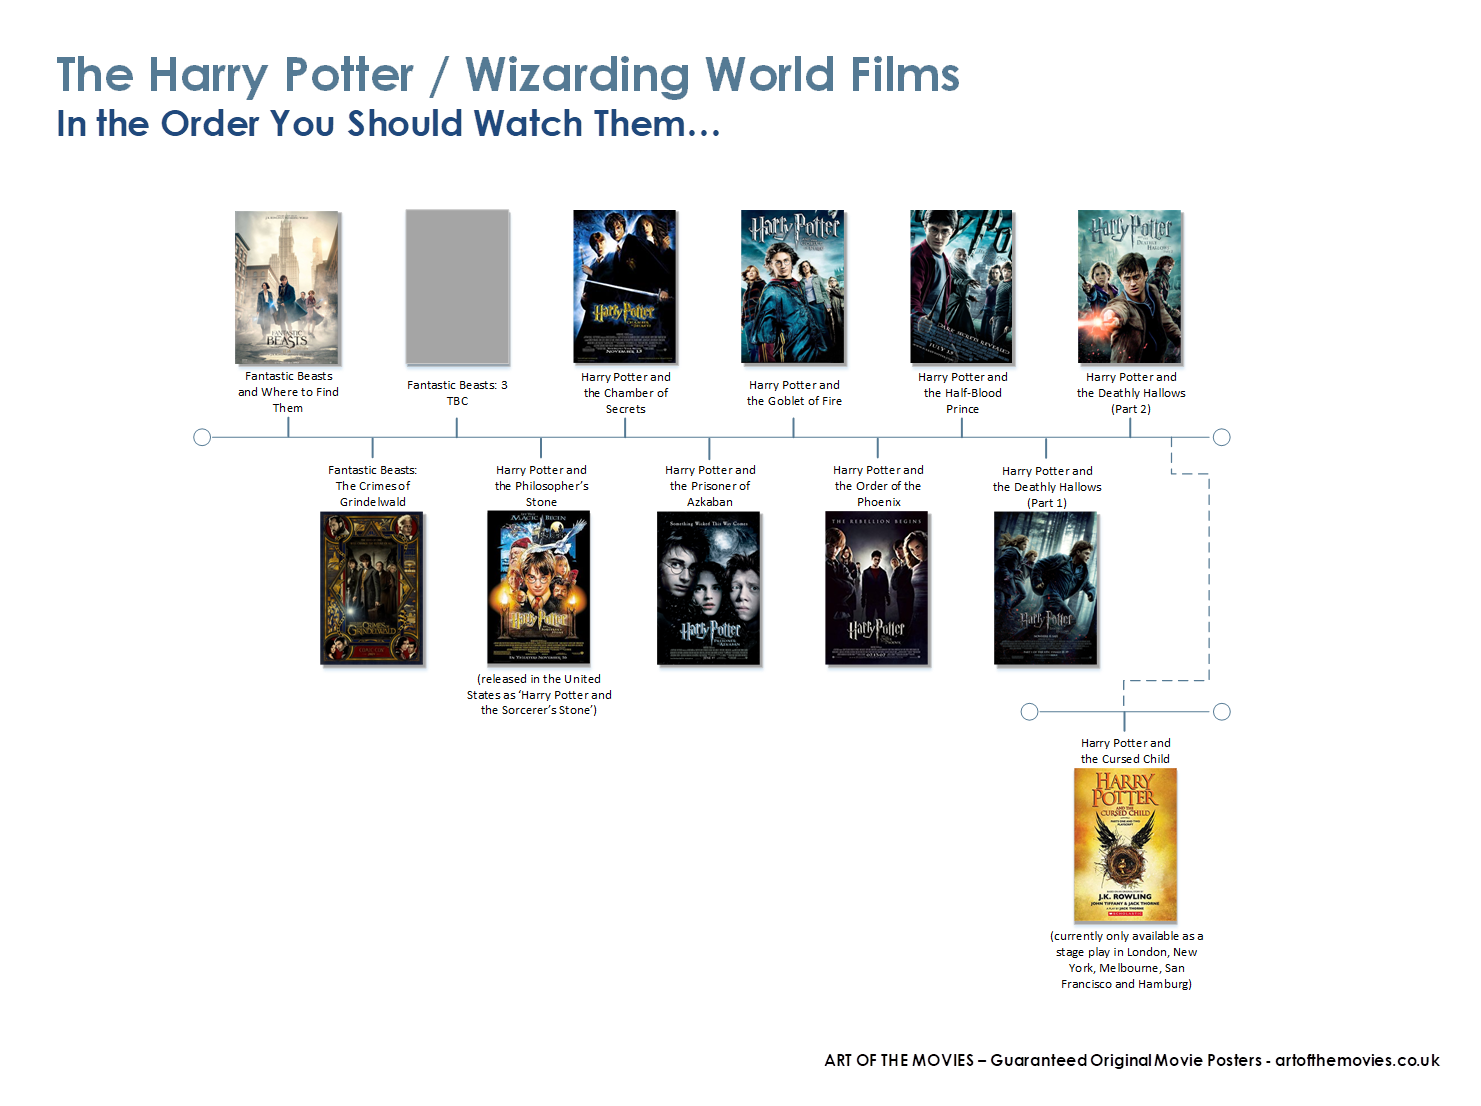 An Infographic showing the right order to watch the Harry Potter / Wizarding World films